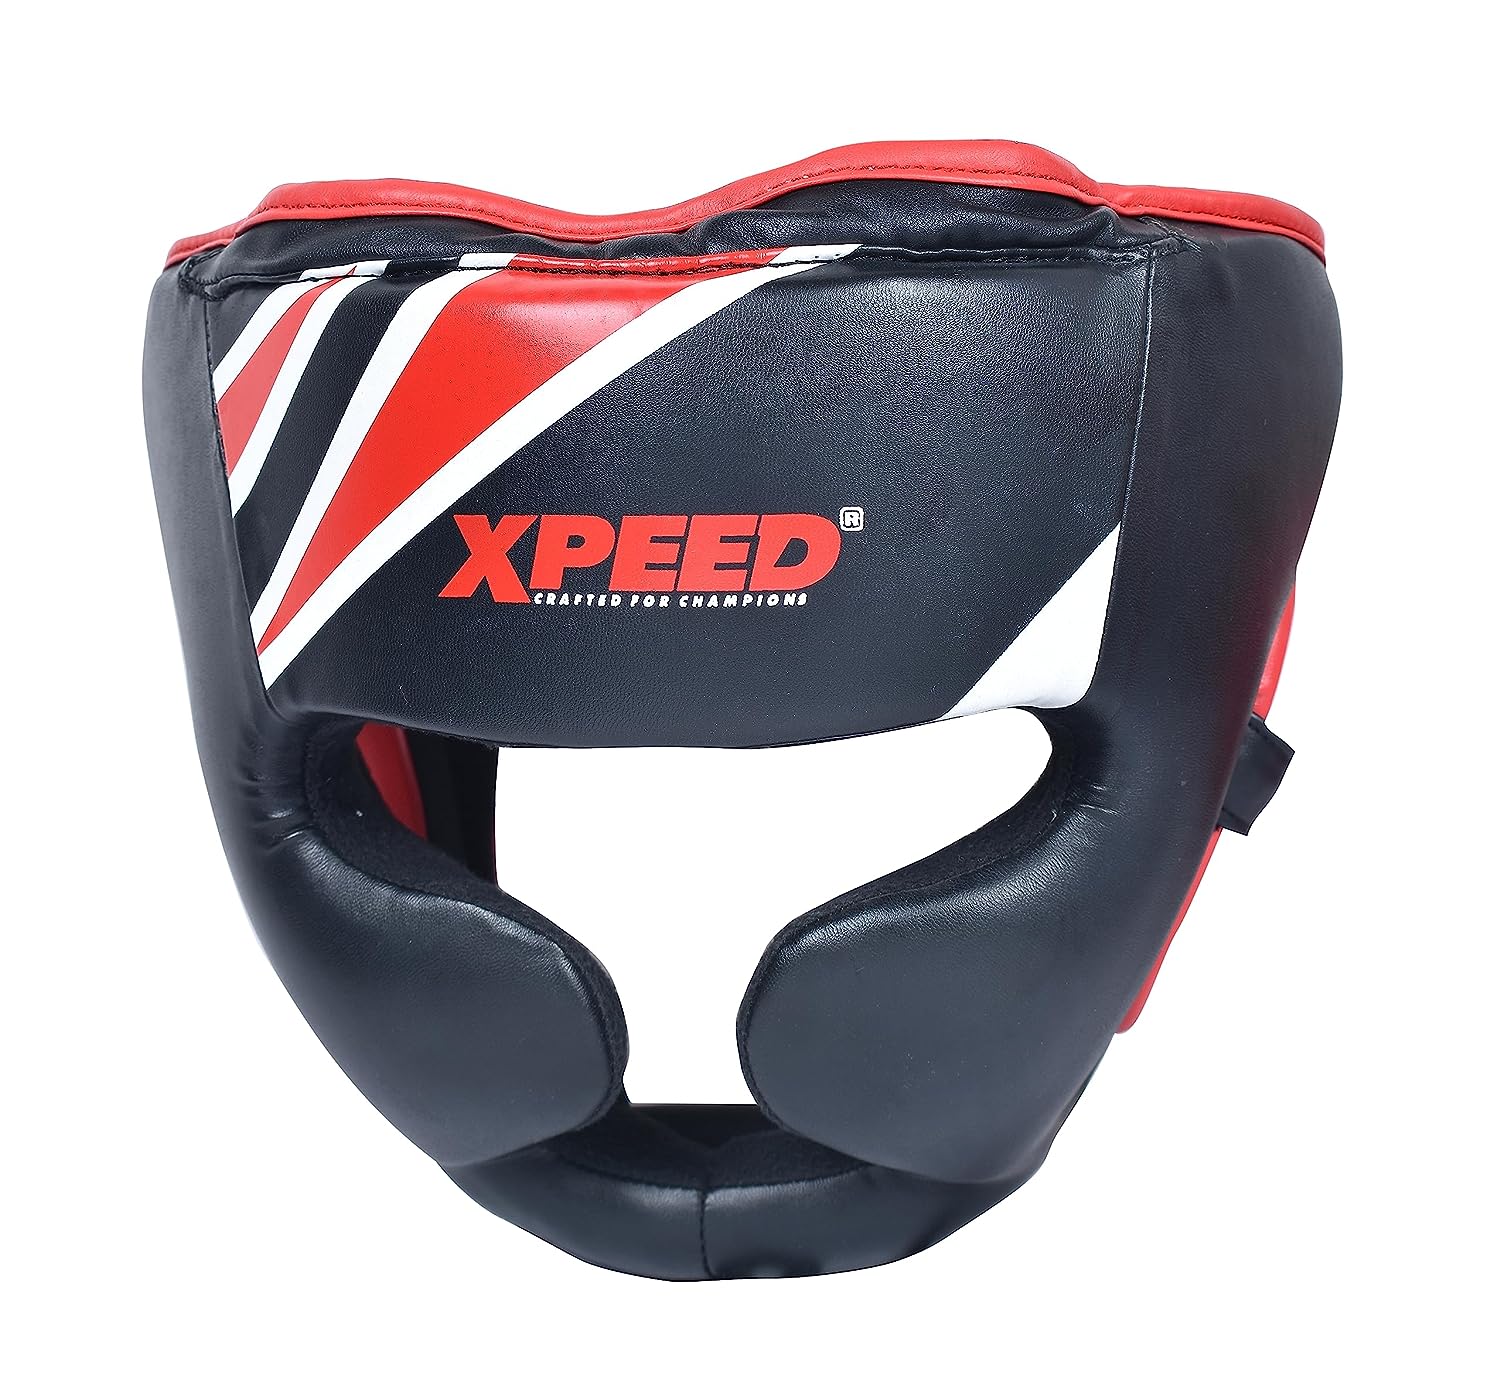 Xpeed Versatile Sparring Headguards || Made with PU Material || Headgear for Boxing || MMA || Martial Arts || Kickboxing